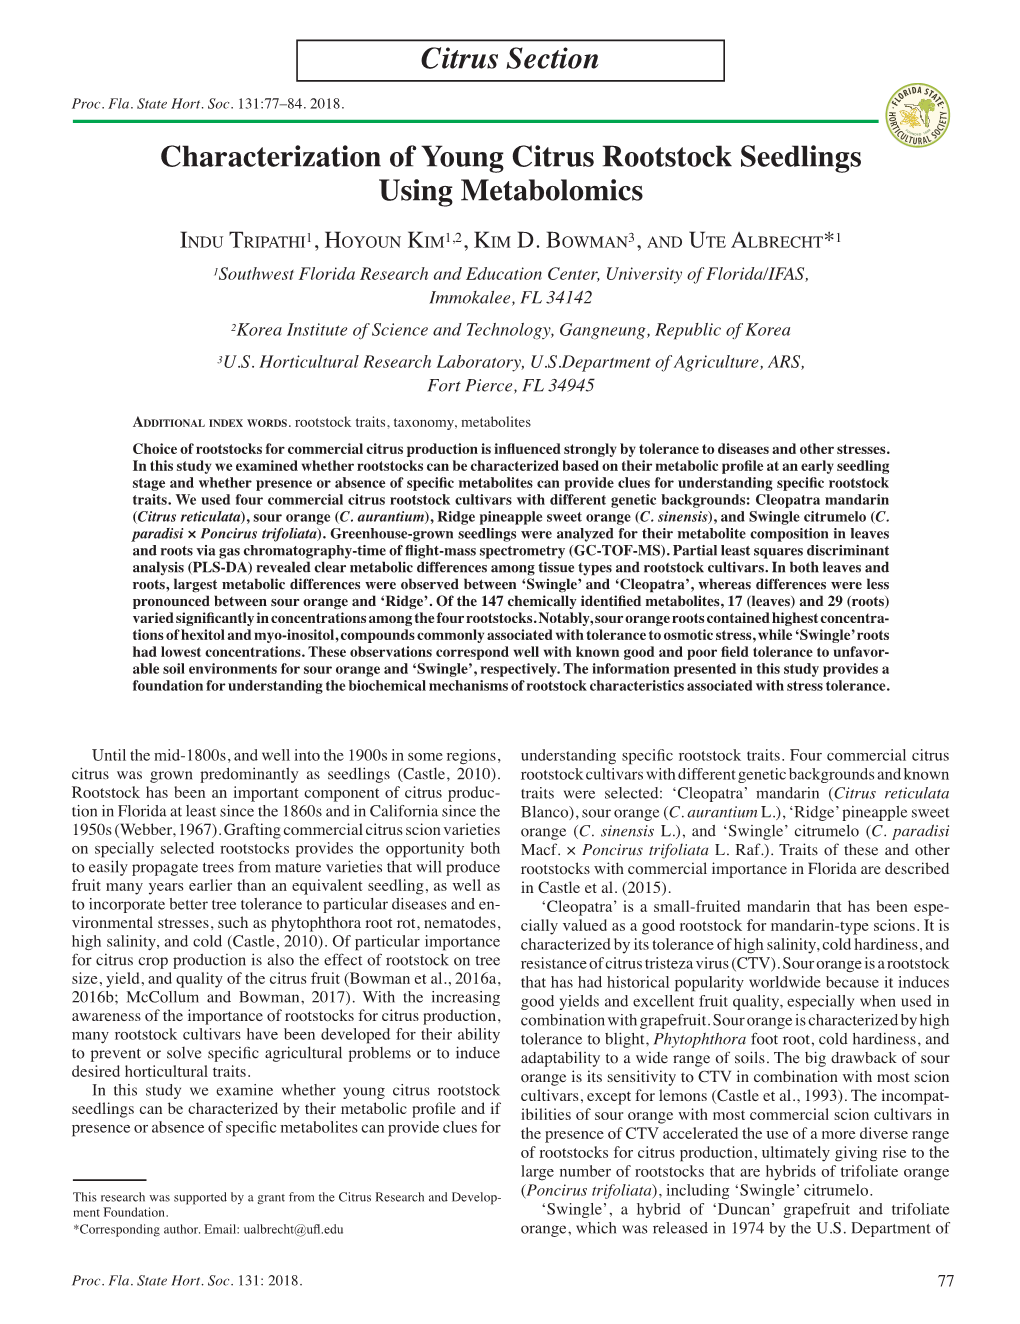 Citrus Section Characterization of Young Citrus Rootstock Seedlings